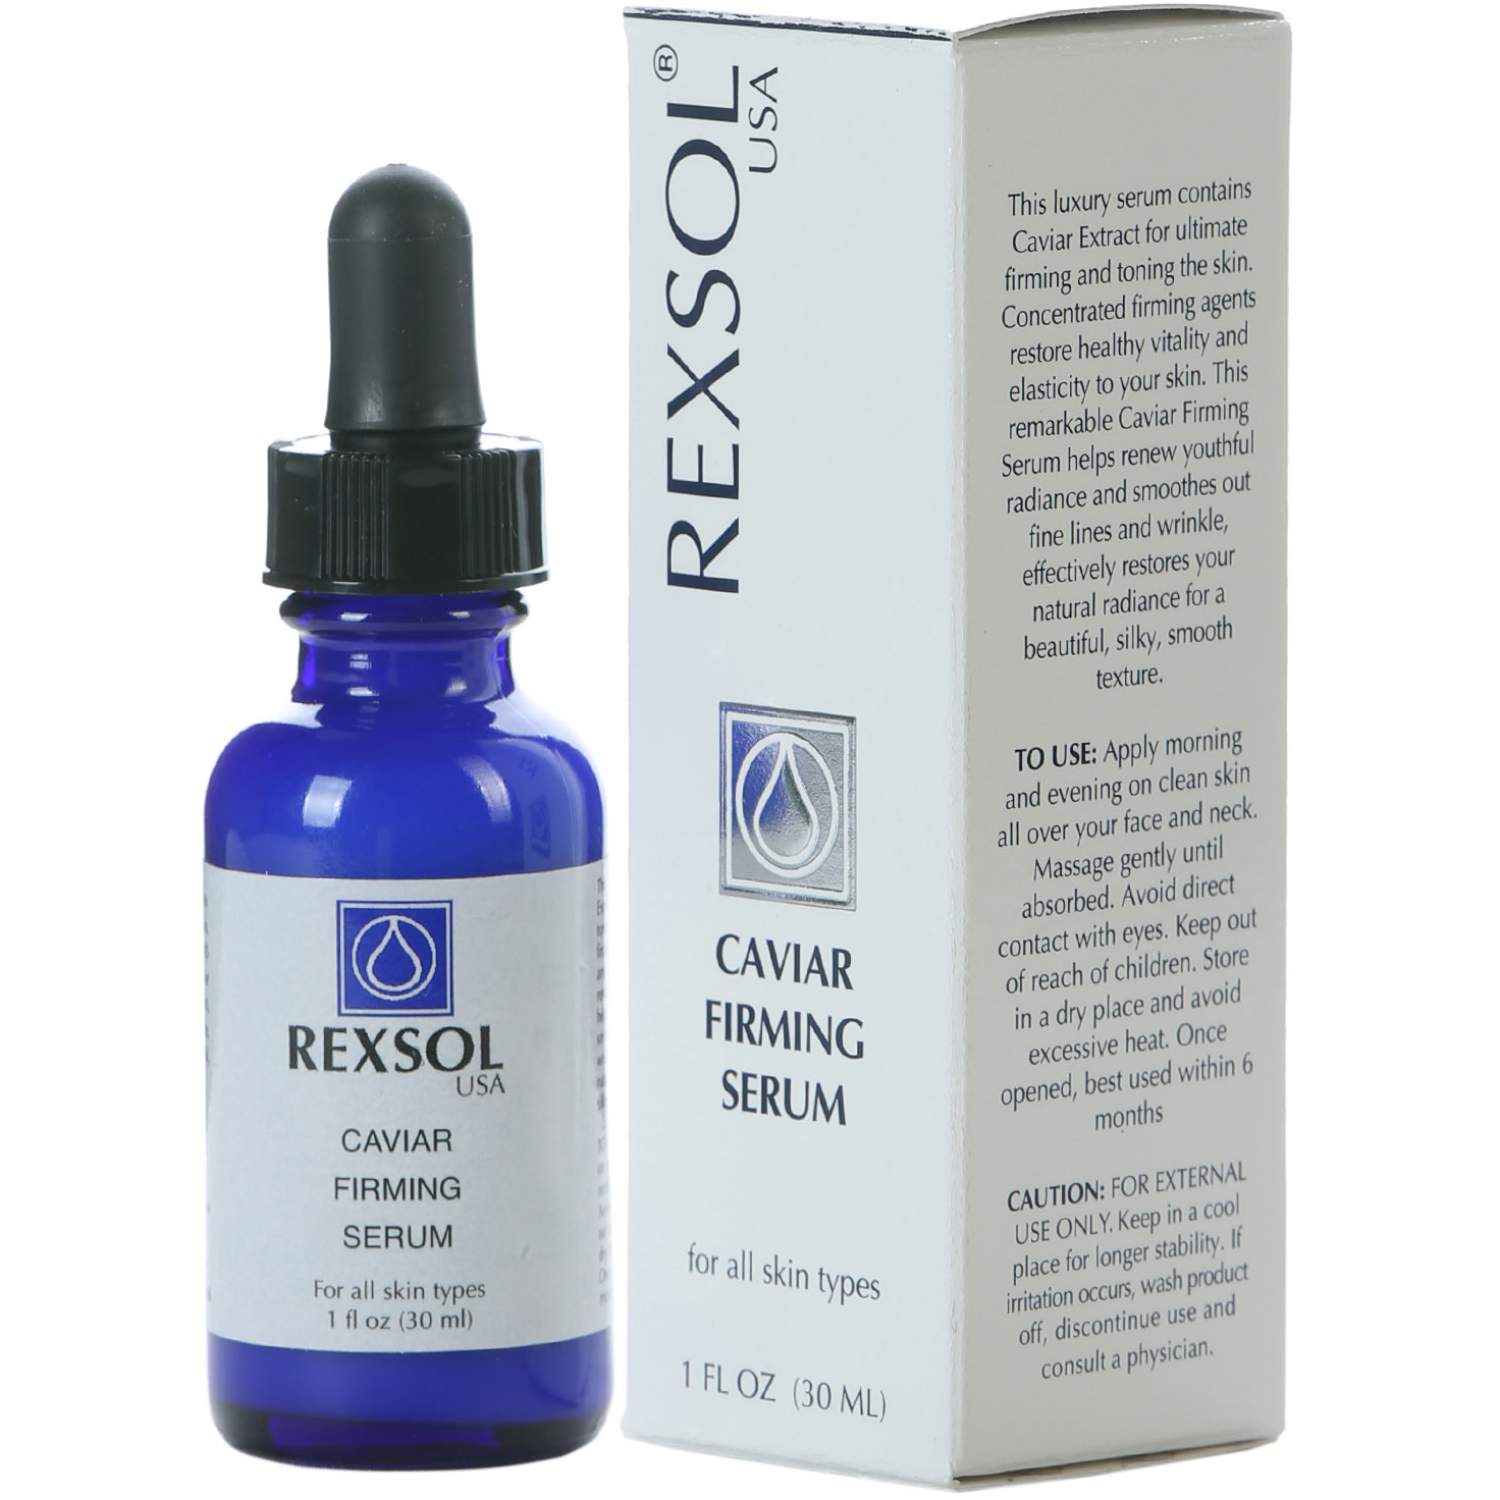 Product Image for Rexsol Caviar Firming Serum 30ml